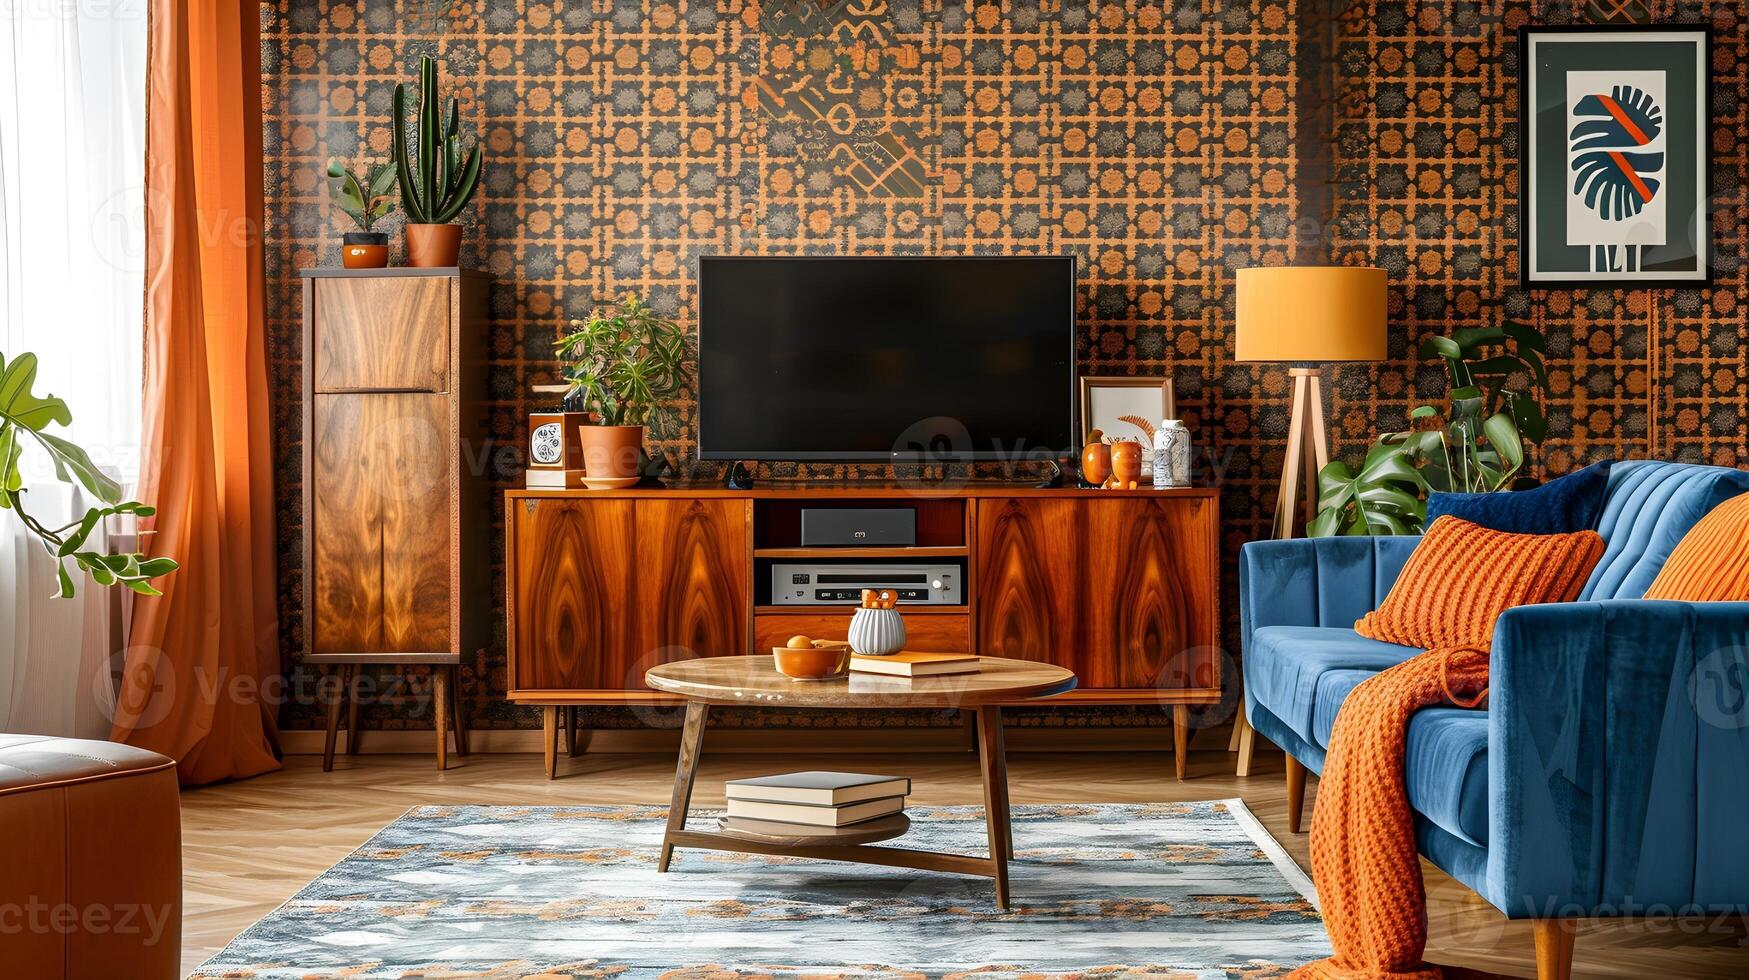 Retro Living Room Oasis Mesmerizing Patterned Wallpaper and Vintage Furniture Complemented by Lush Greenery photo